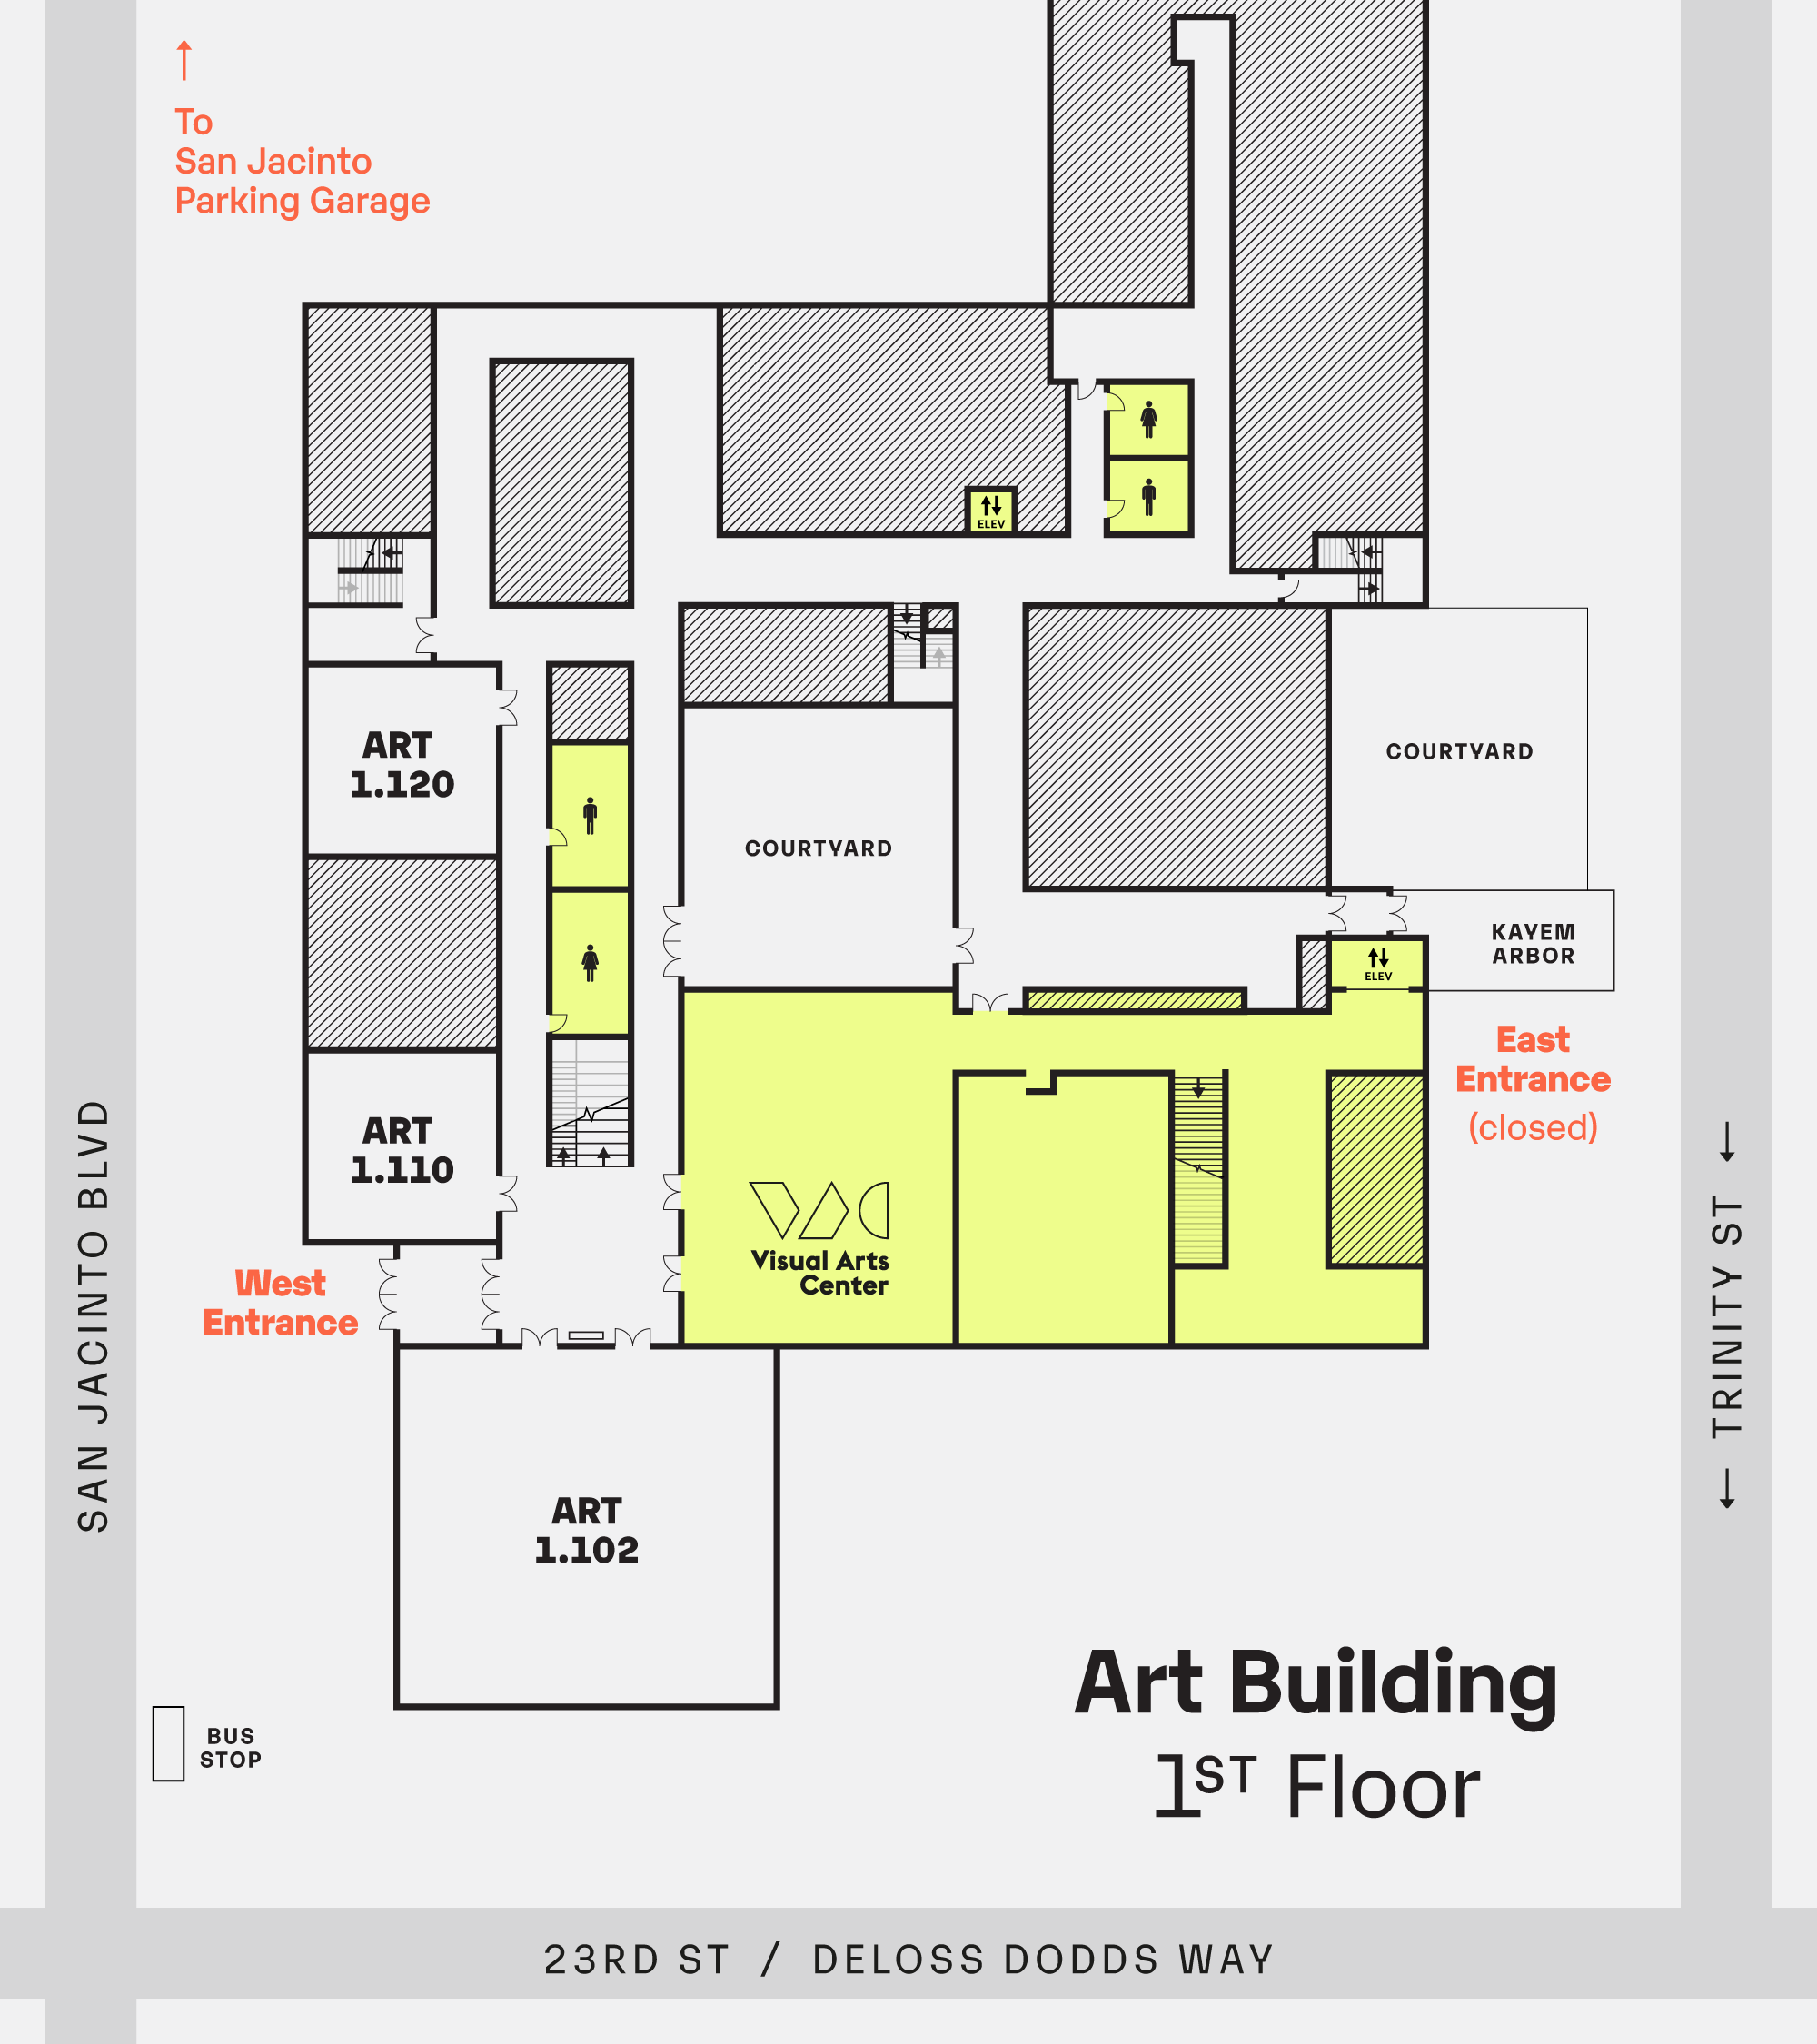 map of Visual Arts Center and relevant spaces within the Art Building